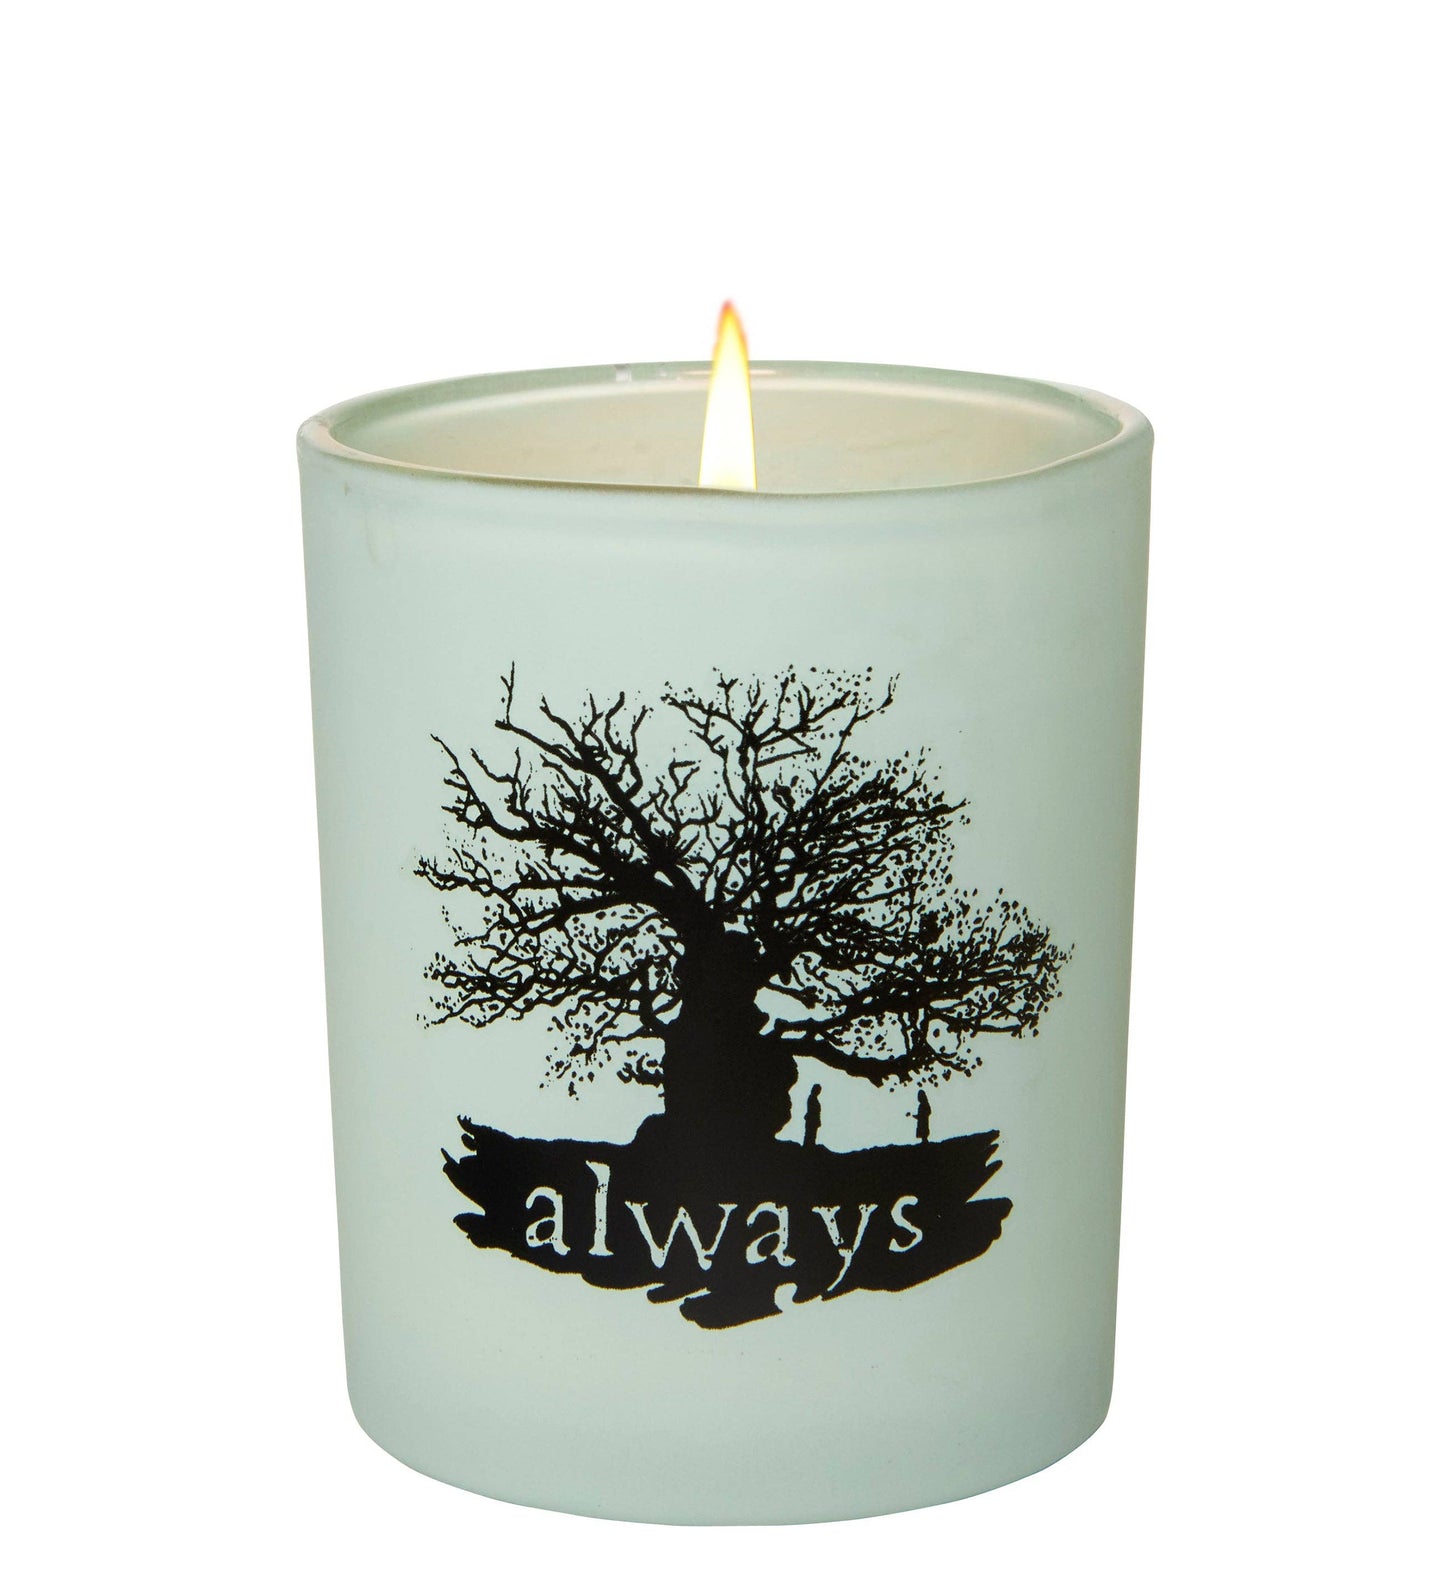 Harry Potter: "Always" Glass Votive Candle